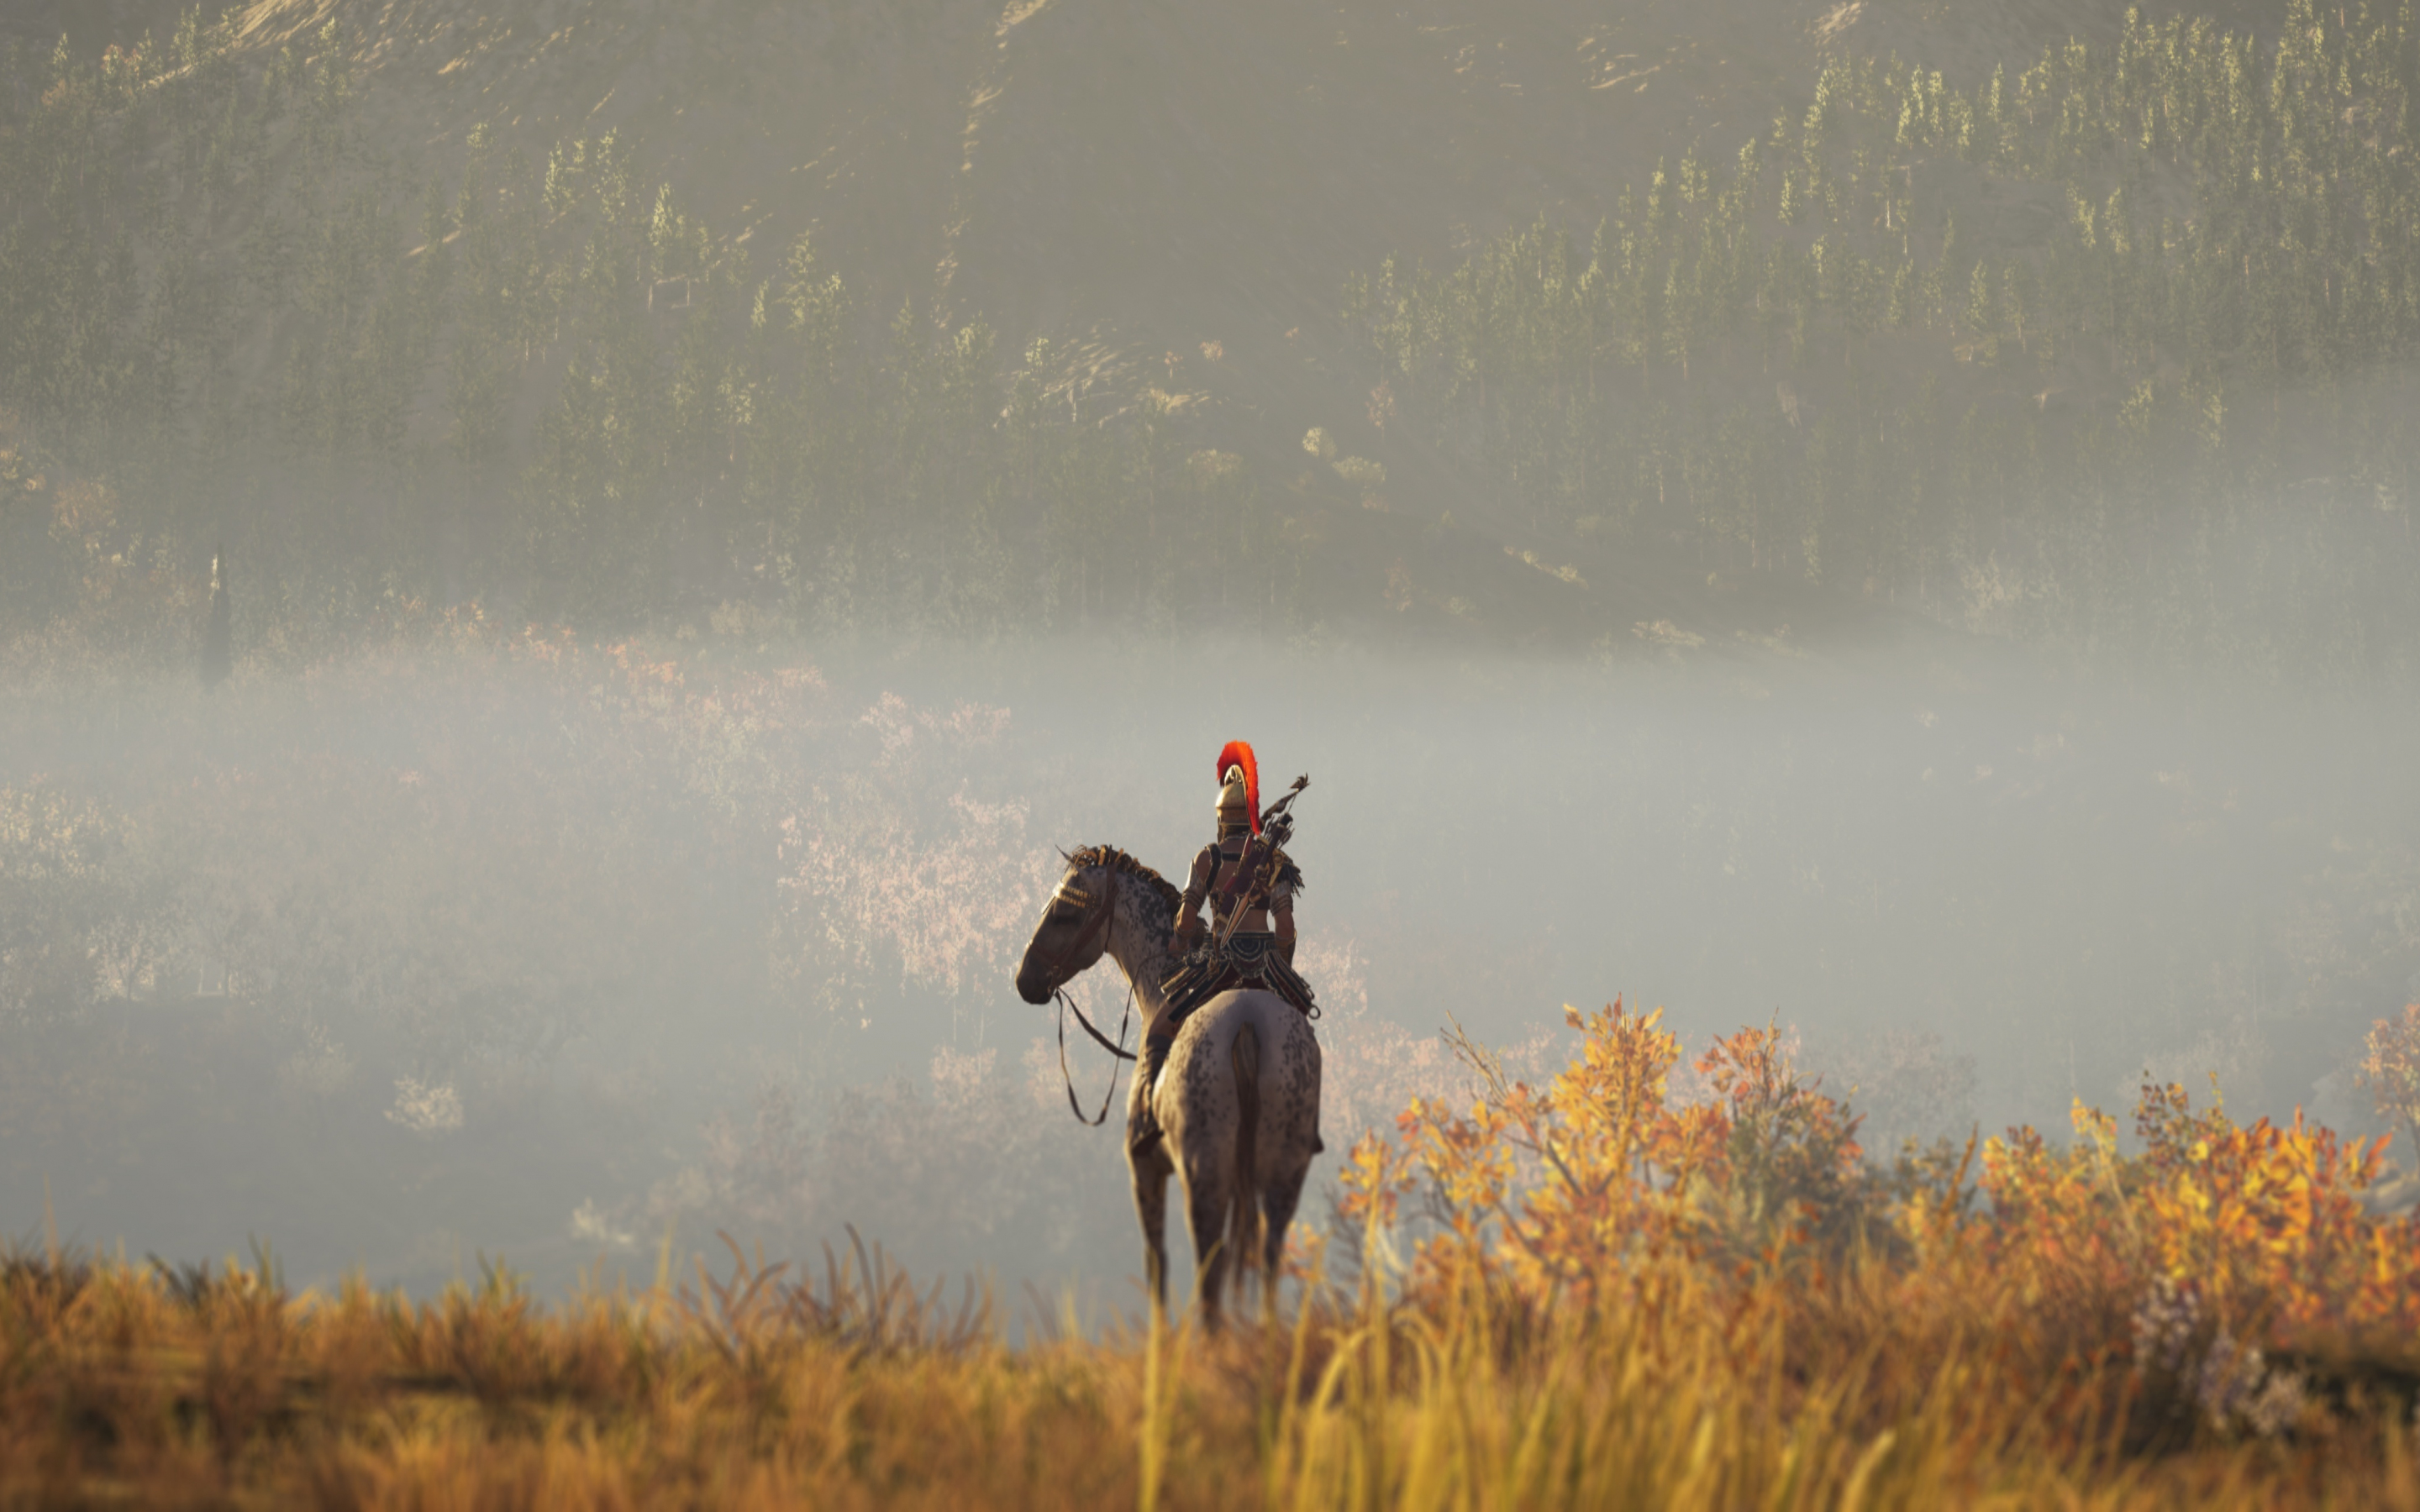 2018, video game, Assassin's Creed Odyssey, horse ride, 2880x1800 wallpaper